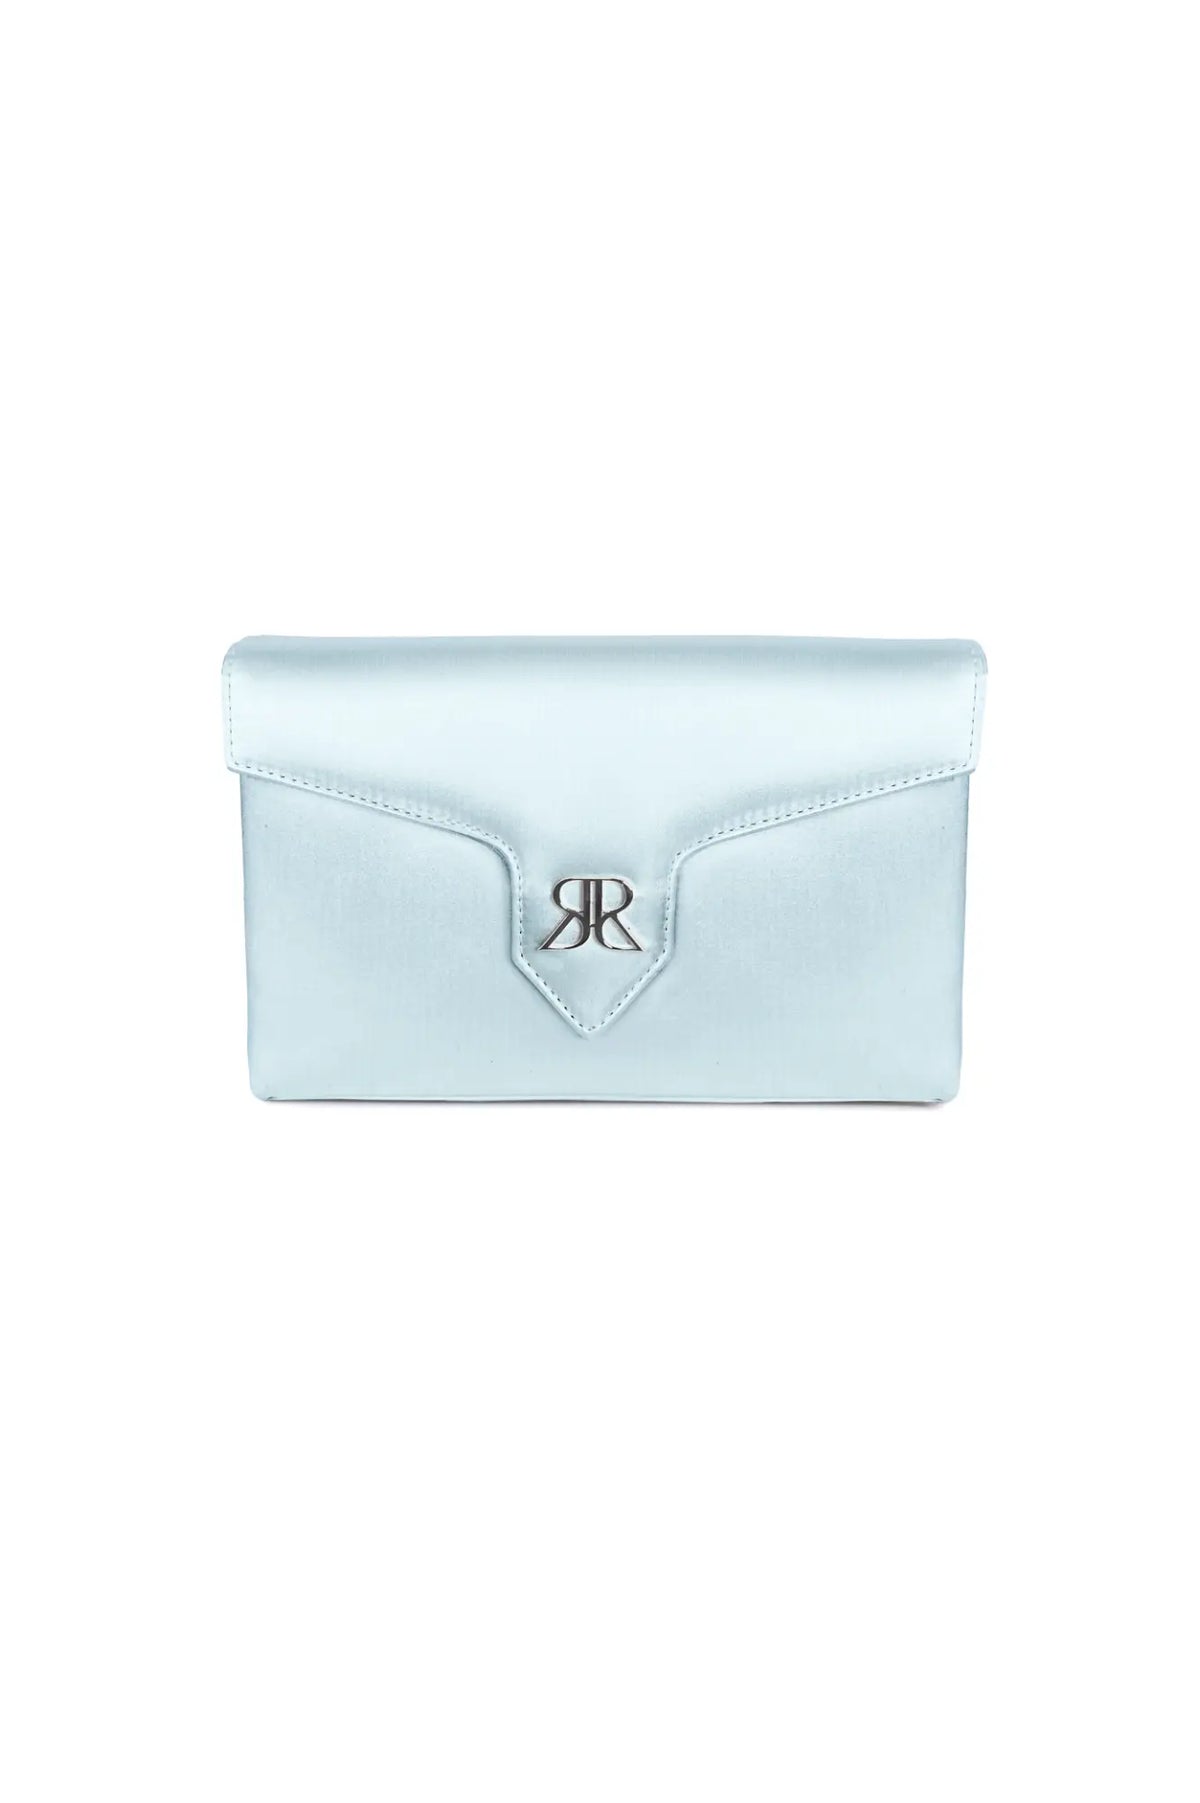 Love Note Envelope Clutch Cinderella Blue from The Bella Rosa Collection, perfect for elegant evenings.